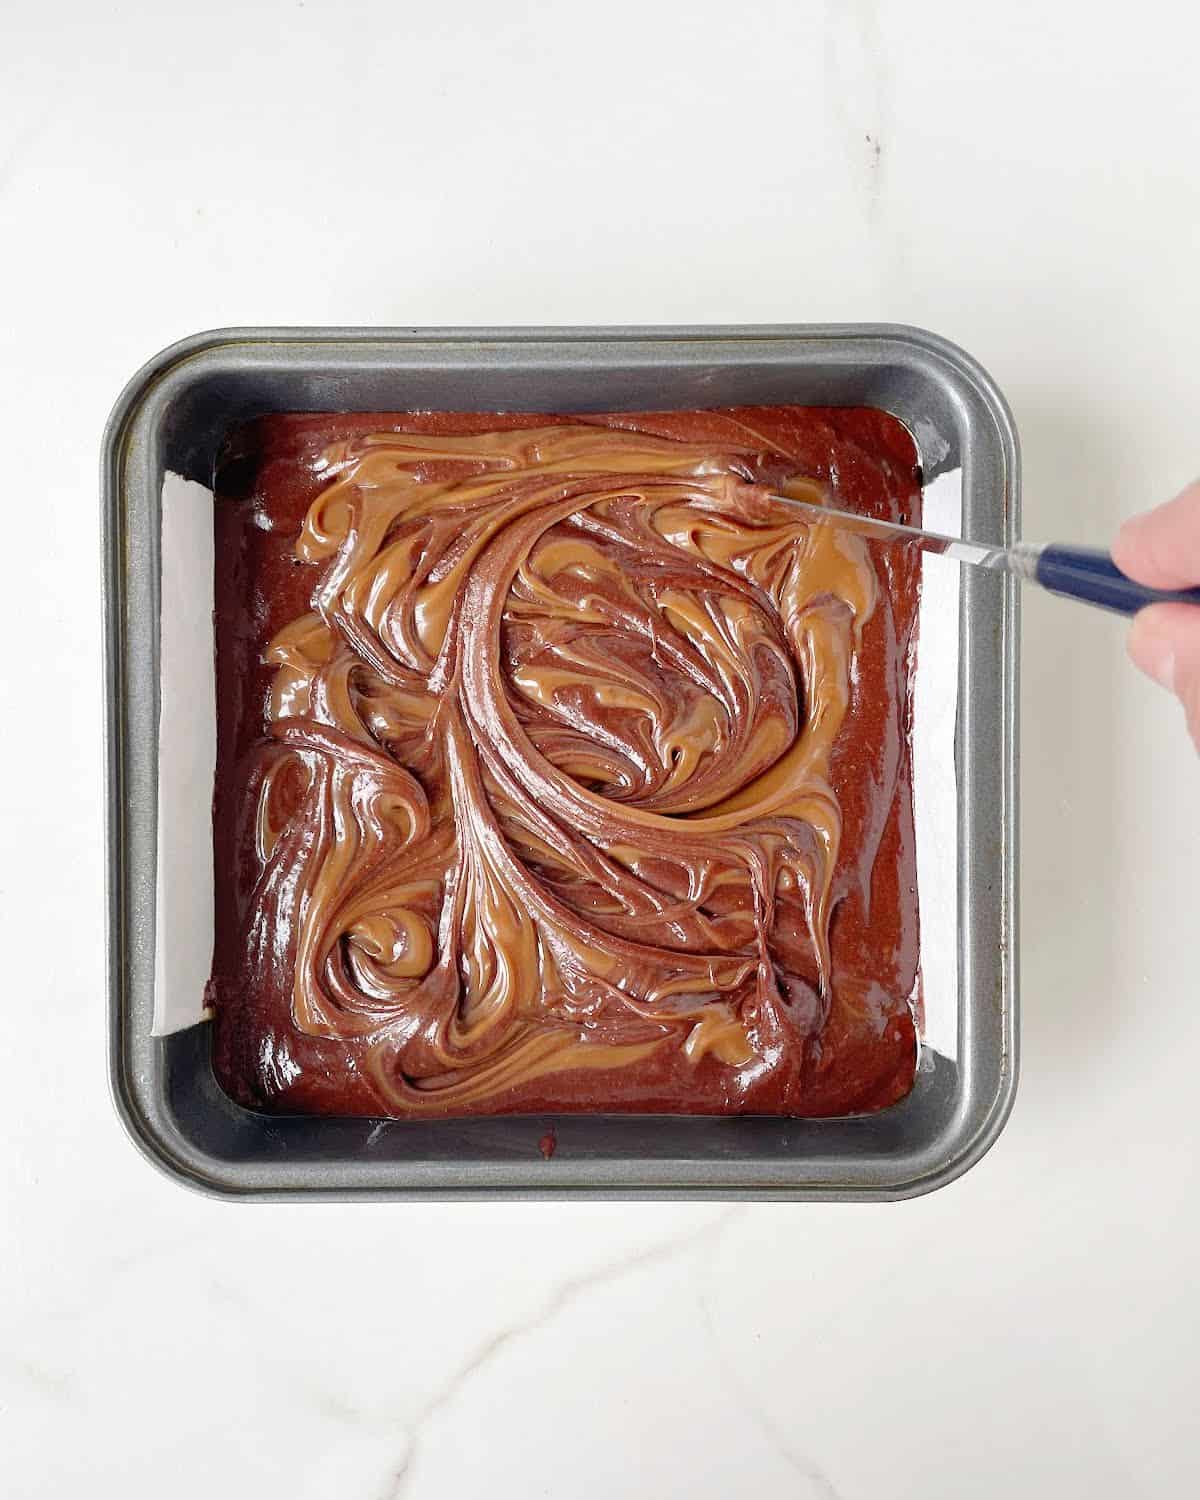 Knife swirling dulce de lech on top of brownie batter in a square metal pan on a white surface. 